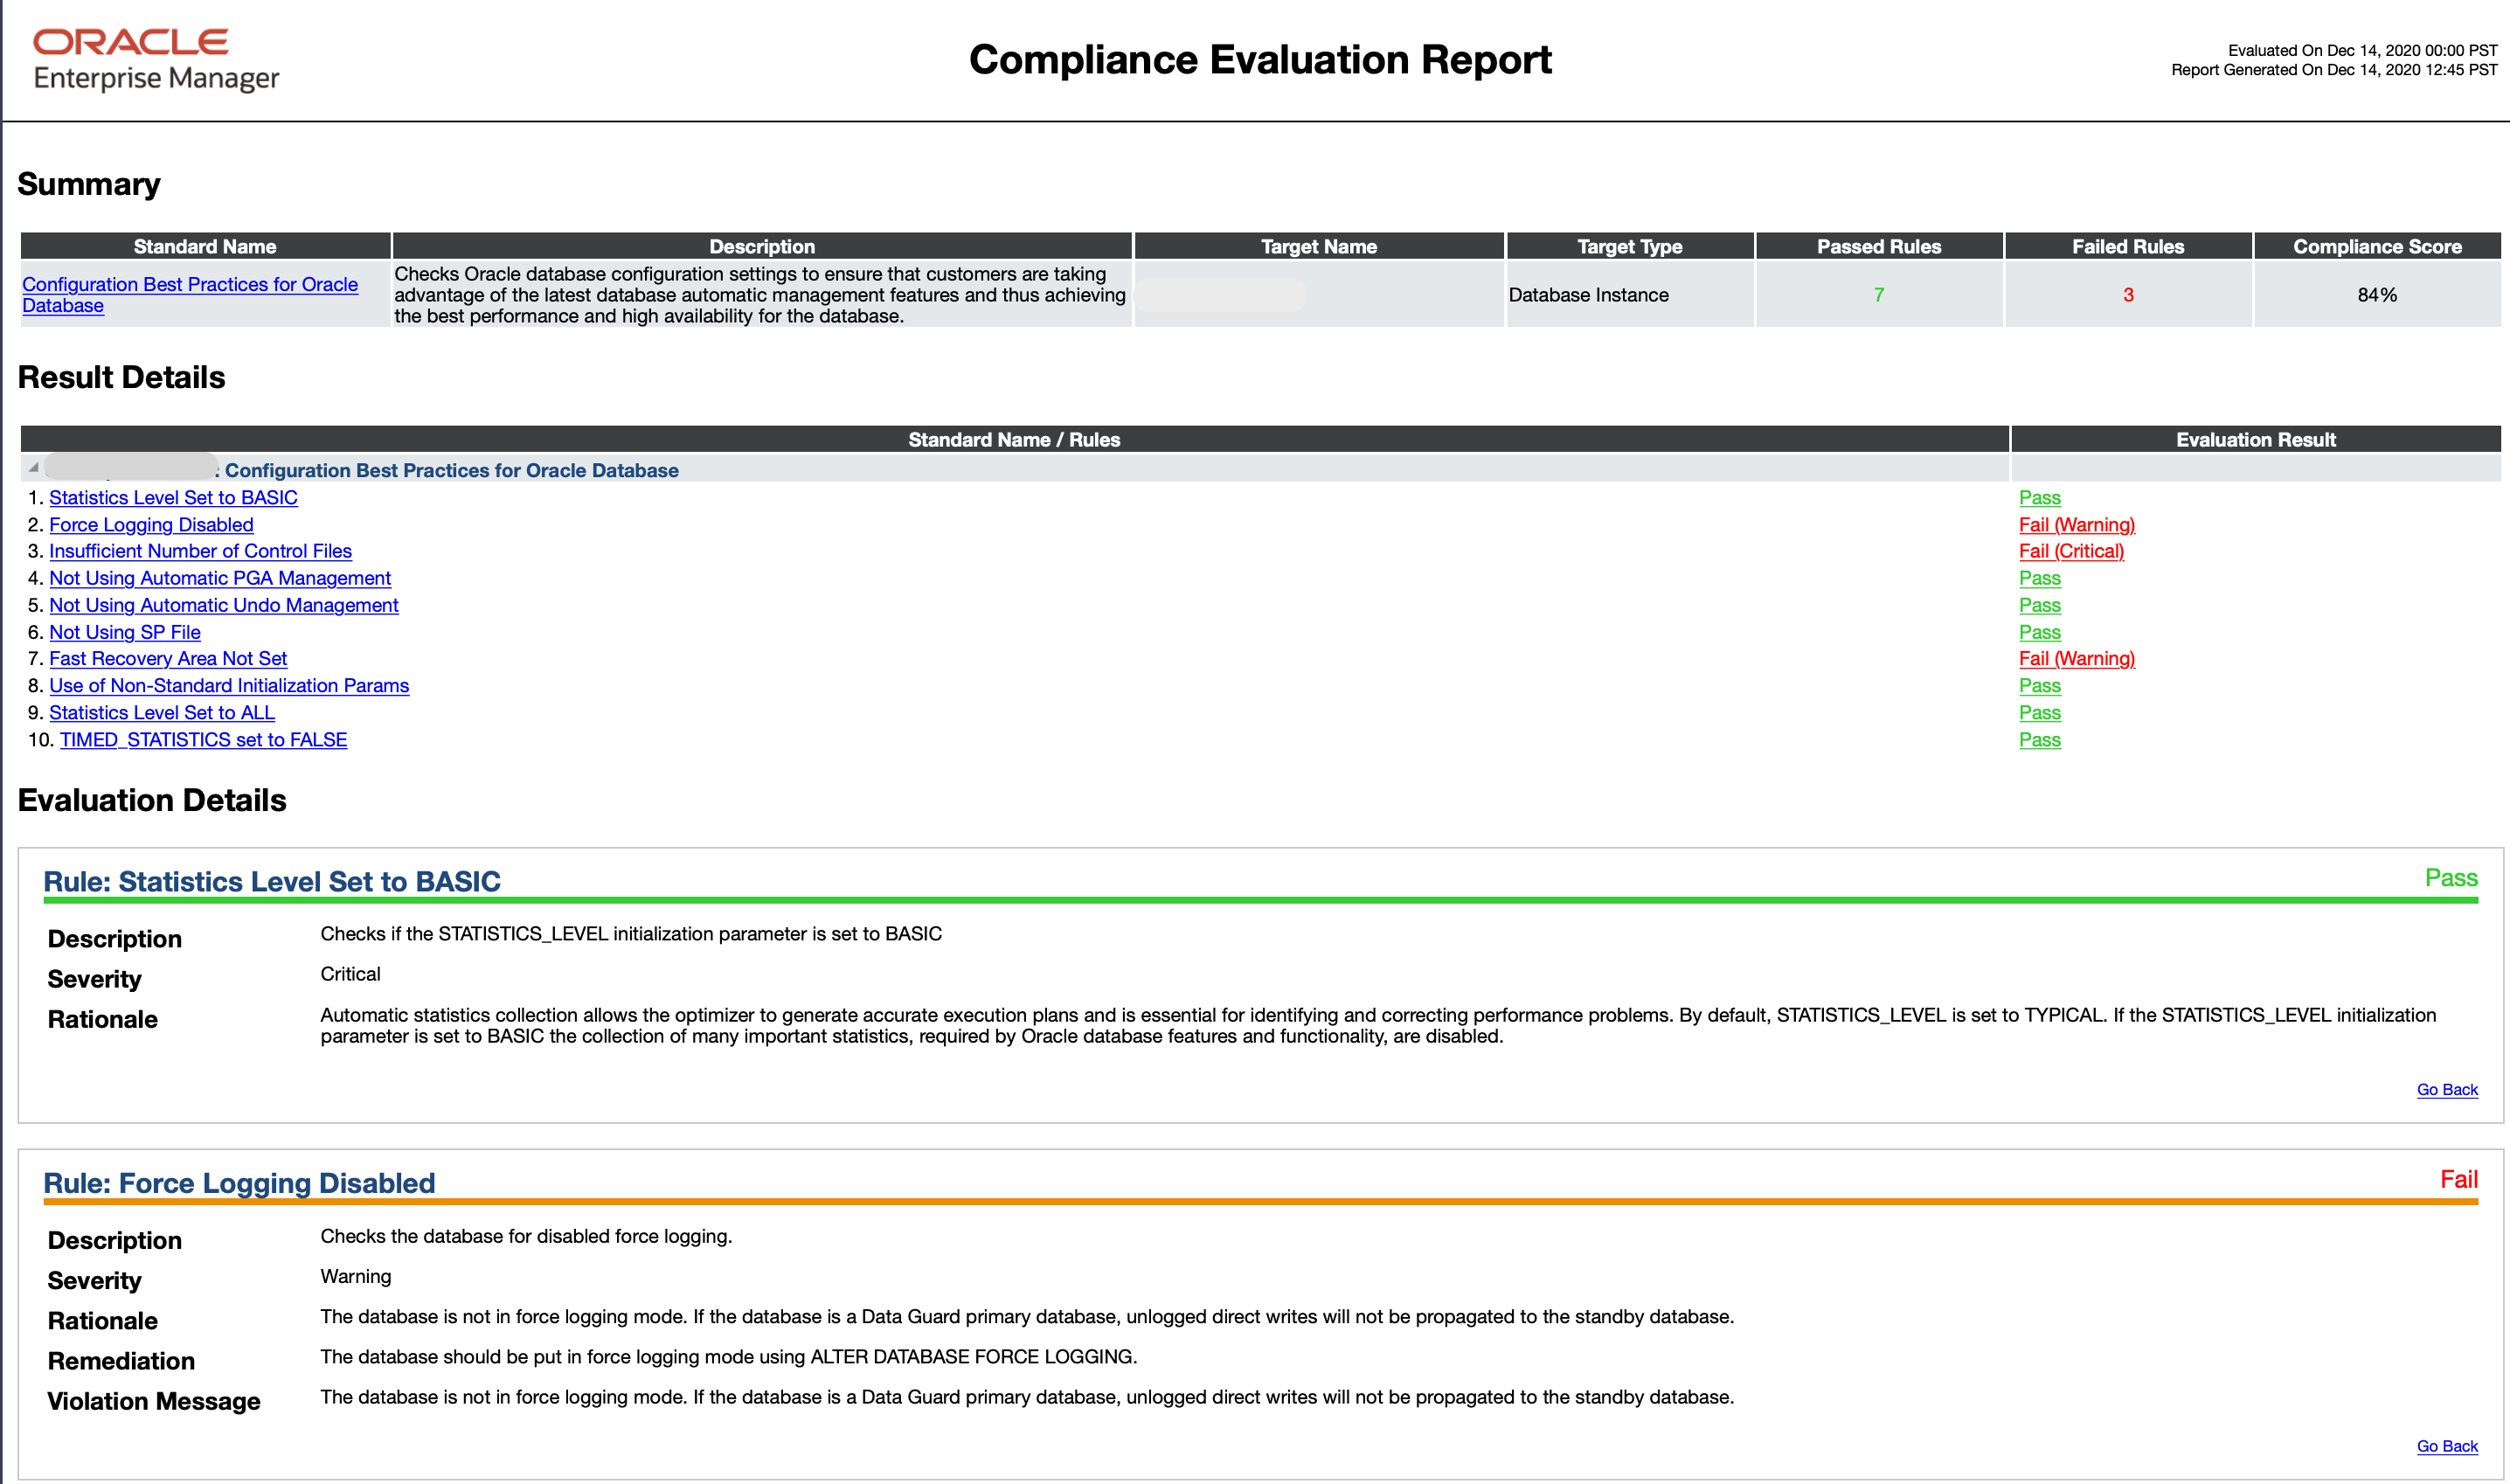 Sample image of the Compliance Evaluation Report